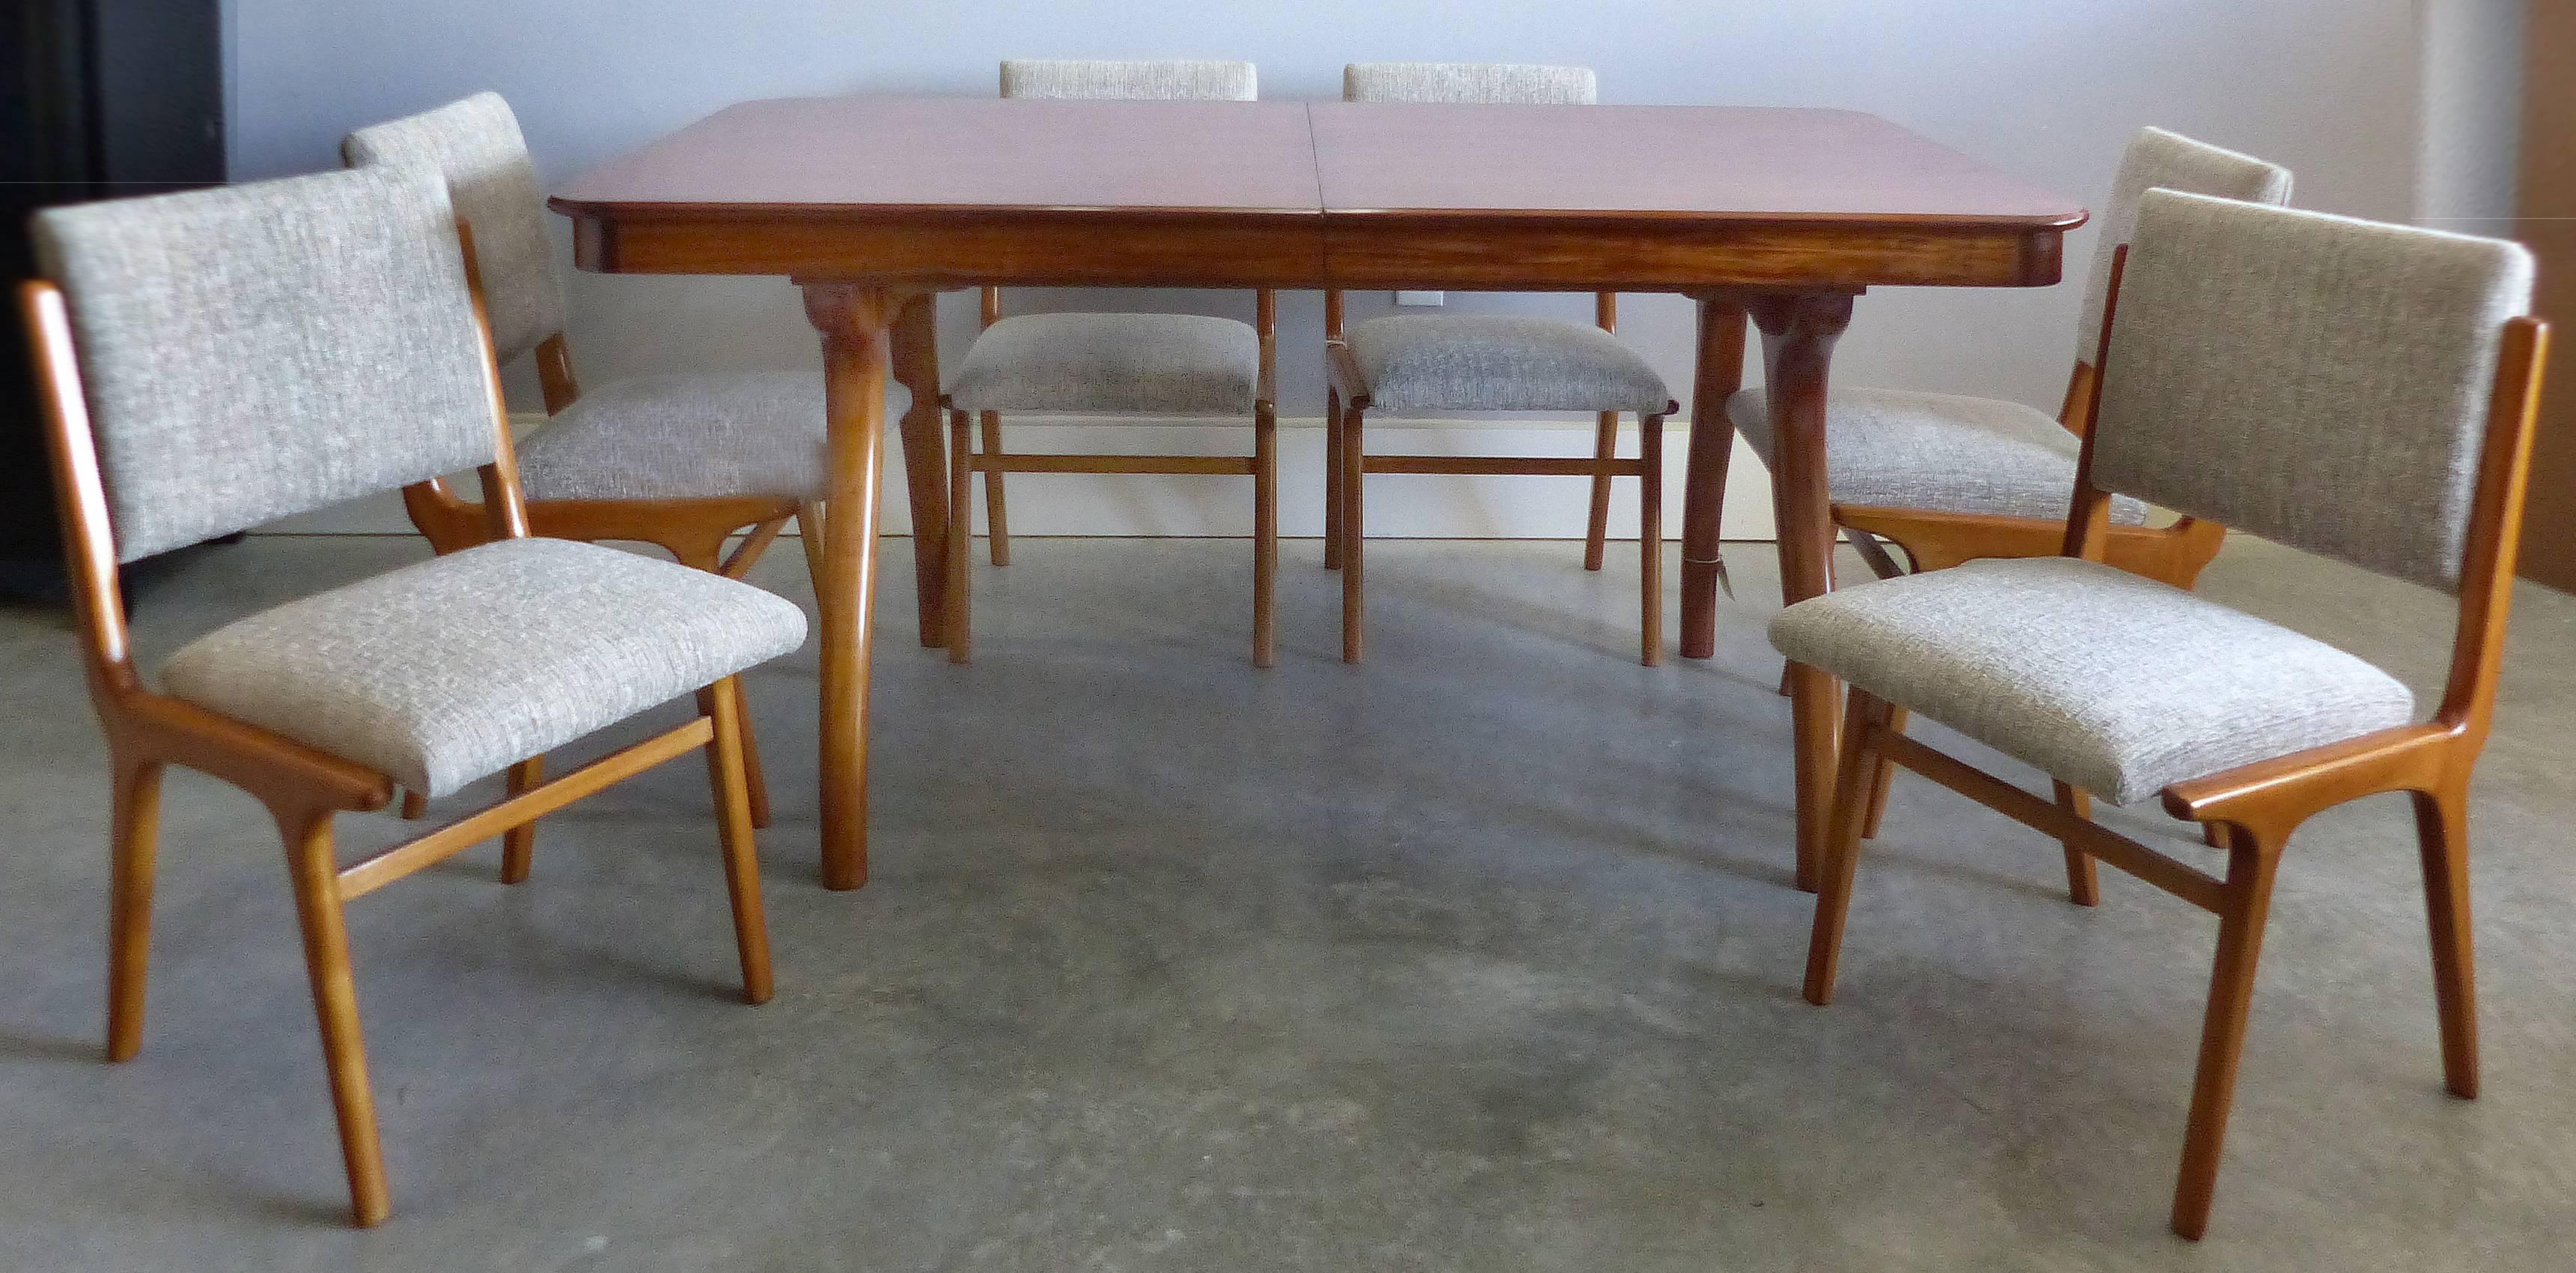 Upholstery Giuseppe Scapinelli De Rosa Wood Dining Table and Chairs circa 1960